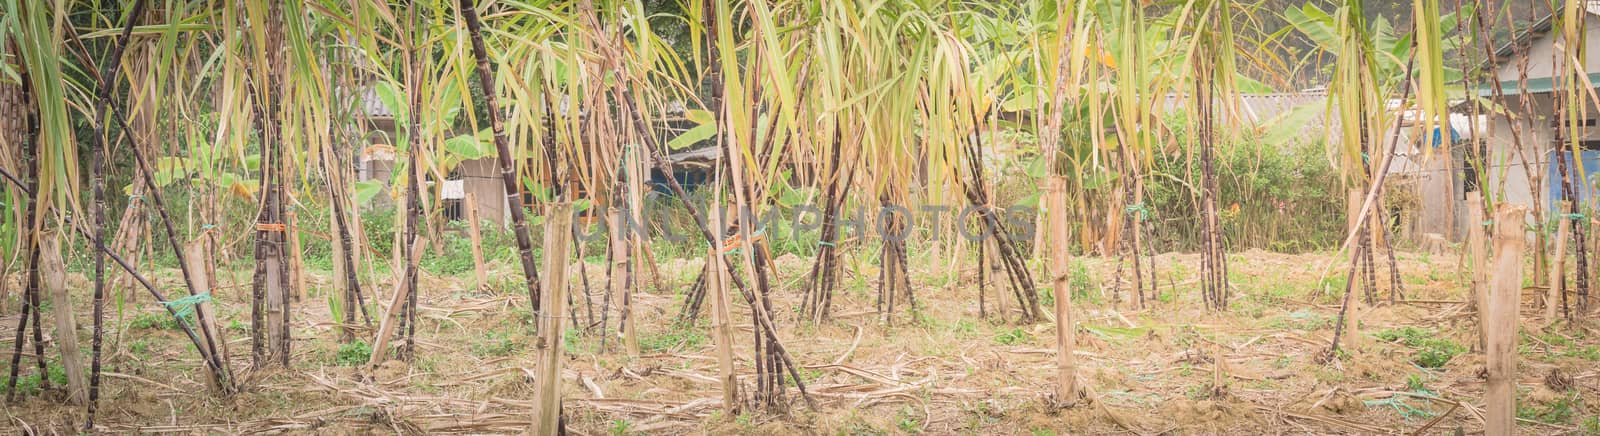 Panorama organic sugarcane farm in country side of the North Vietnam. Healthy purple sugar cane stick stalks and green long leaves growing with bamboo trellis stake support